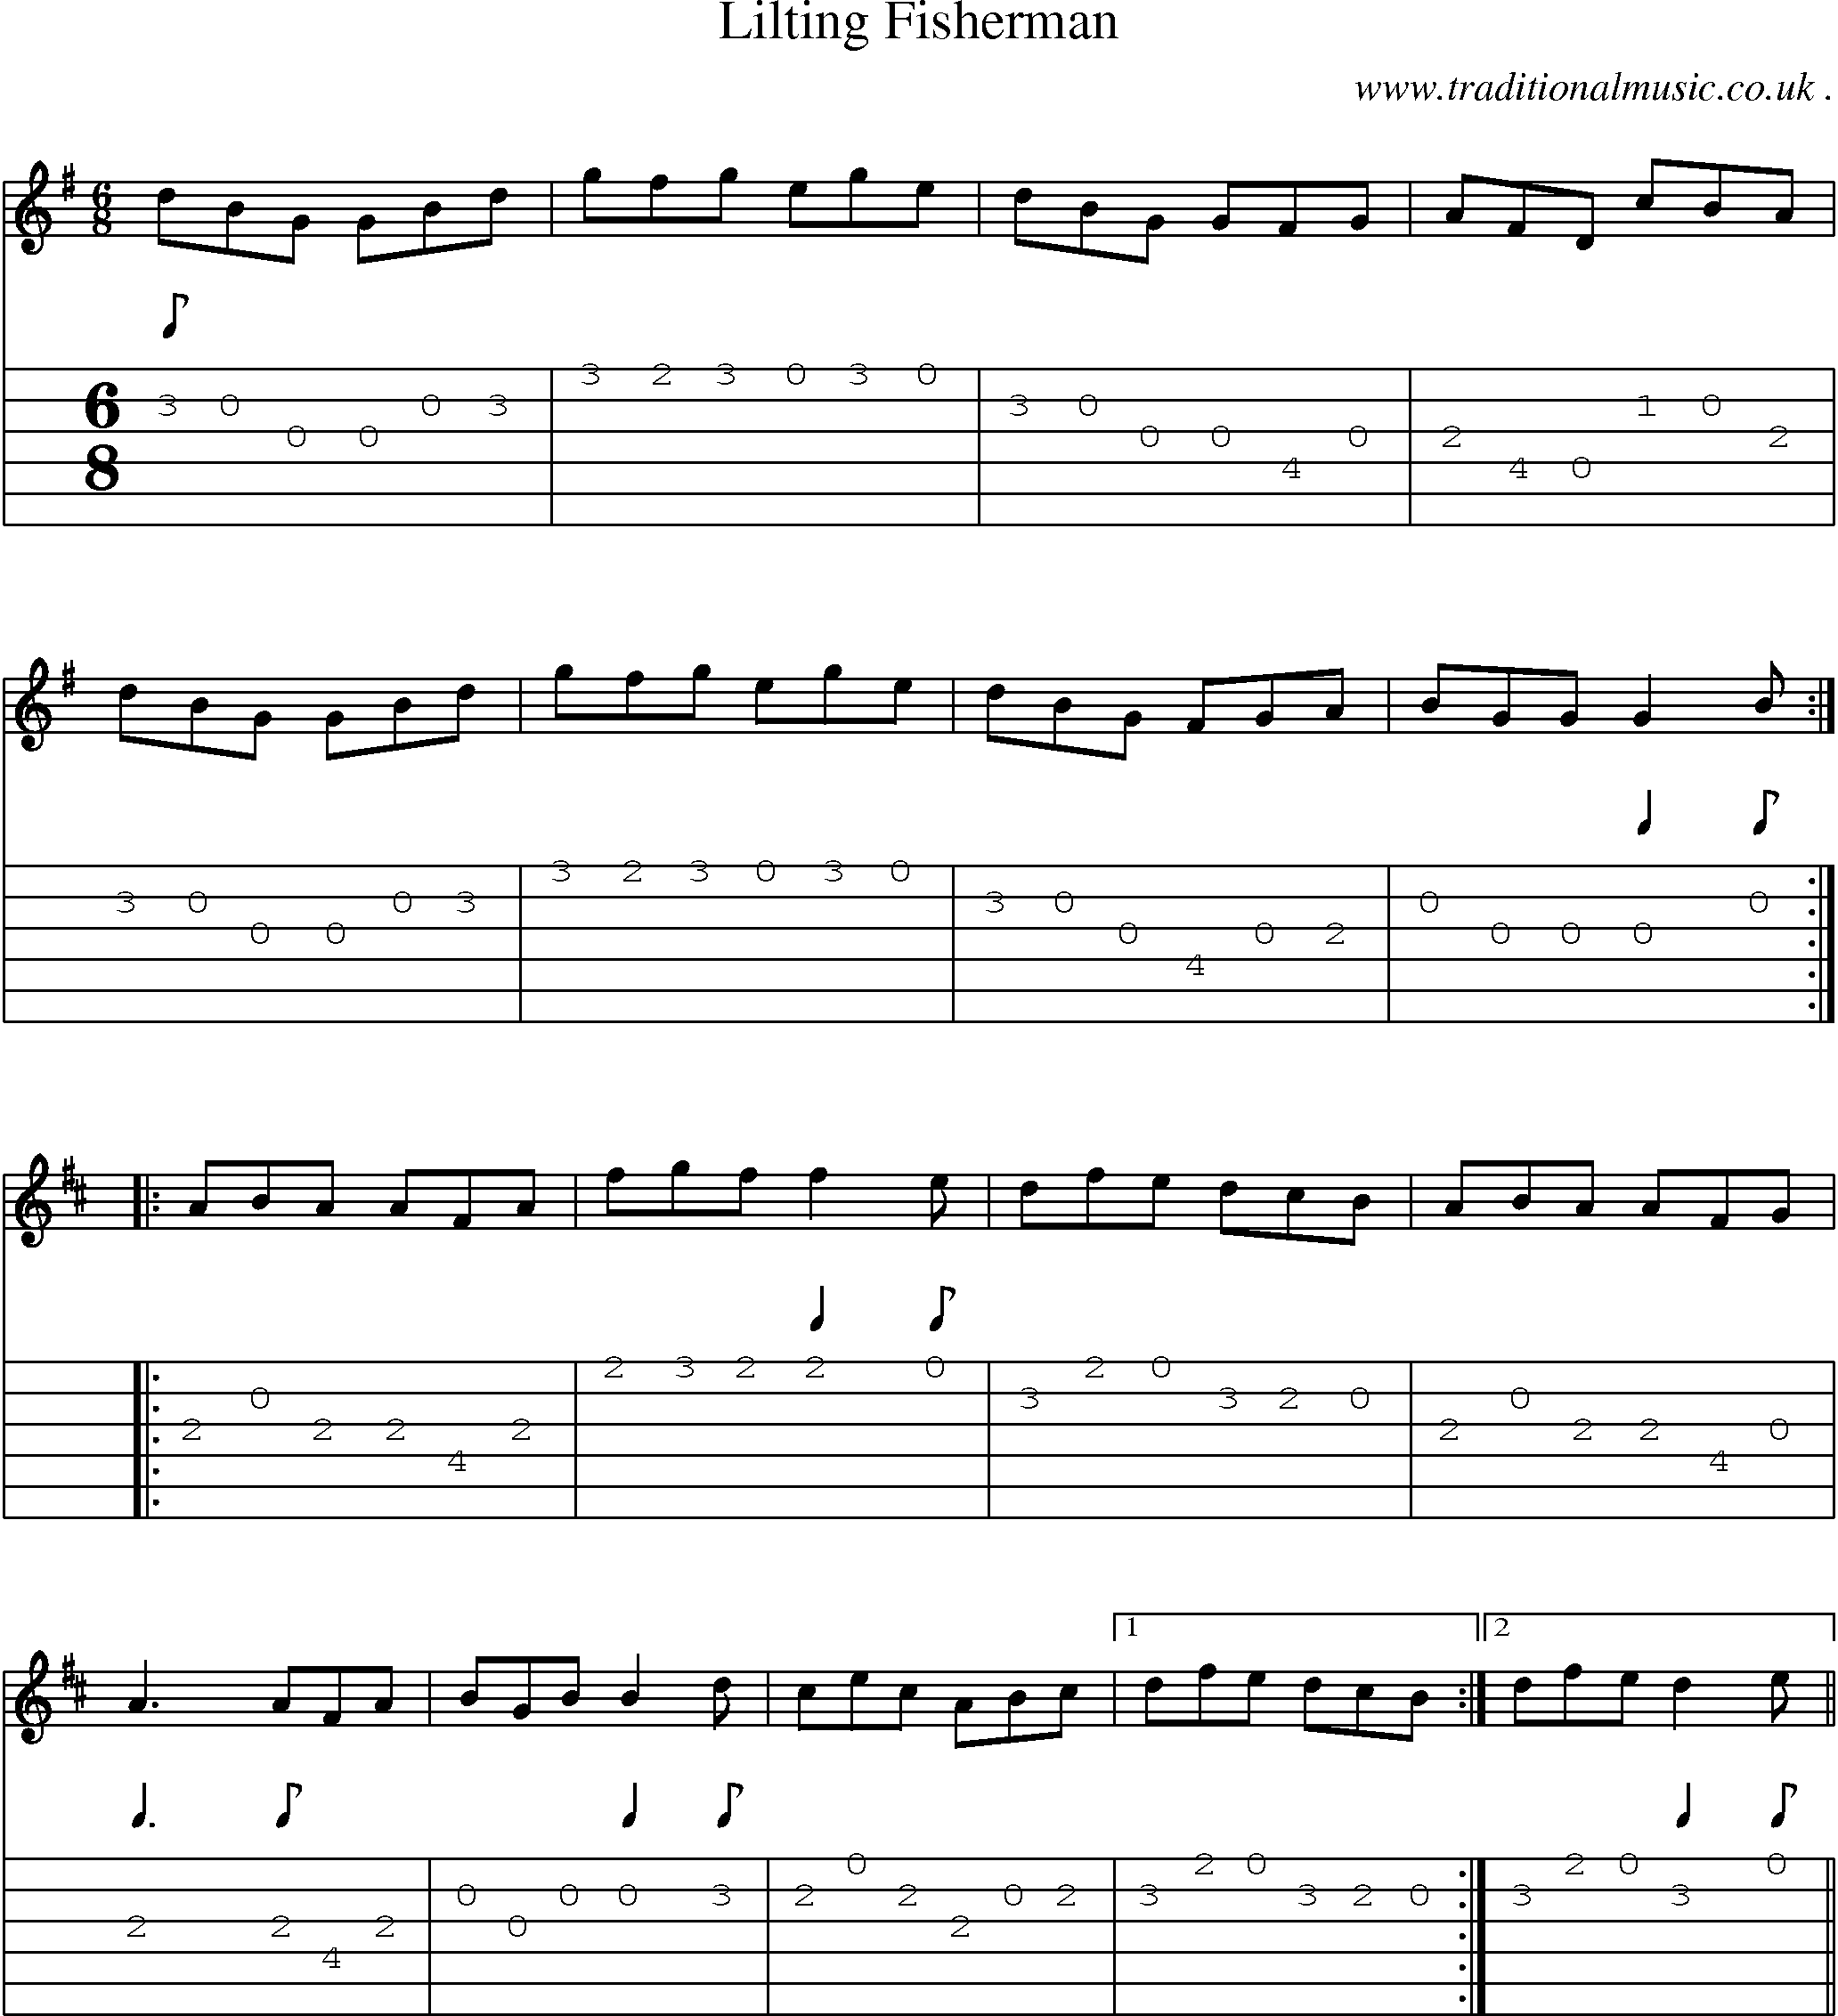 Sheet-Music and Guitar Tabs for Lilting Fisherman